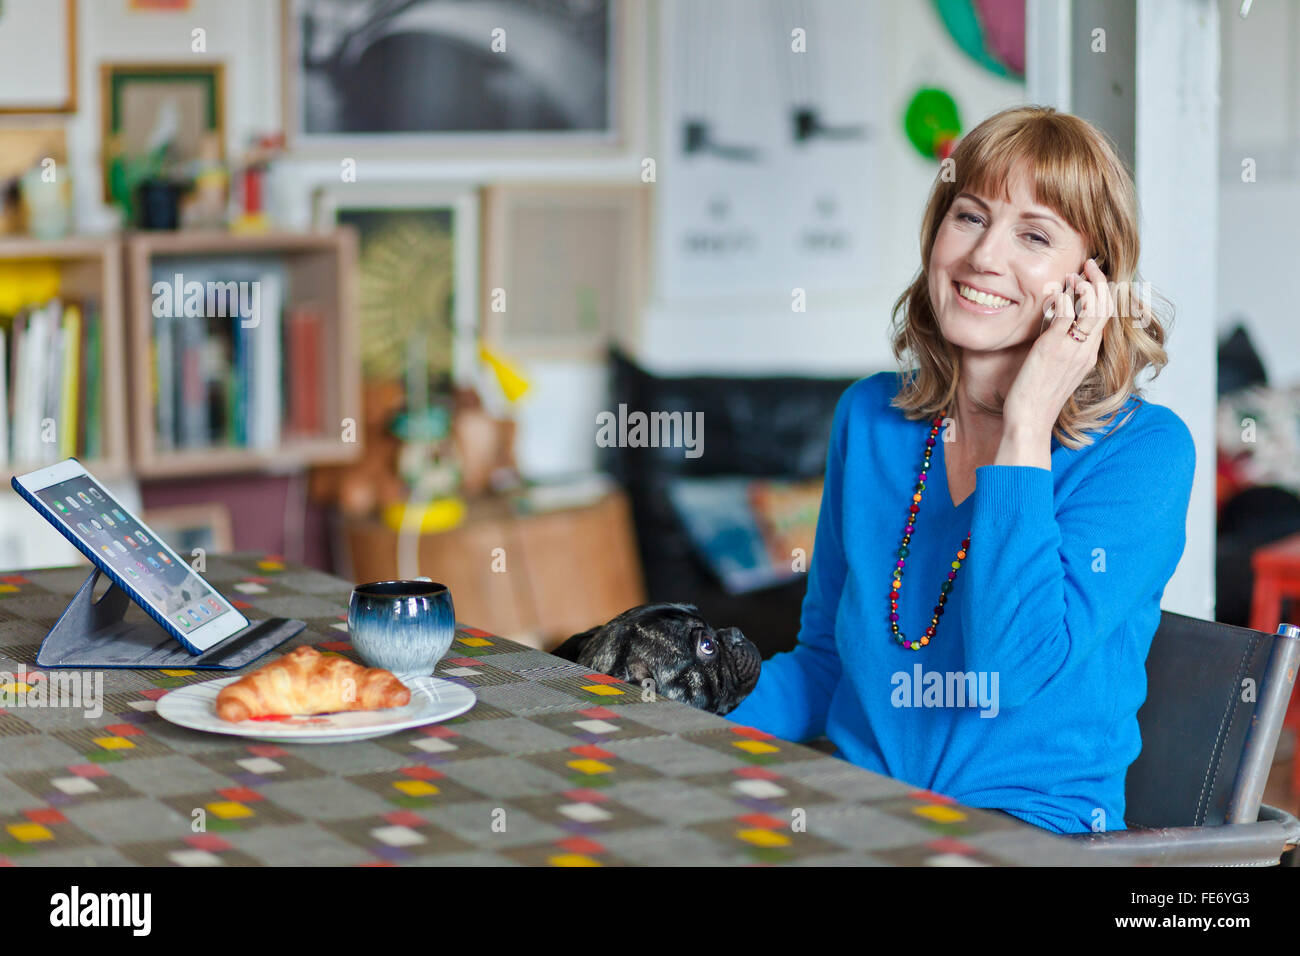 Woman smiles with a dog holding a phone at the living room table. Stock Photo